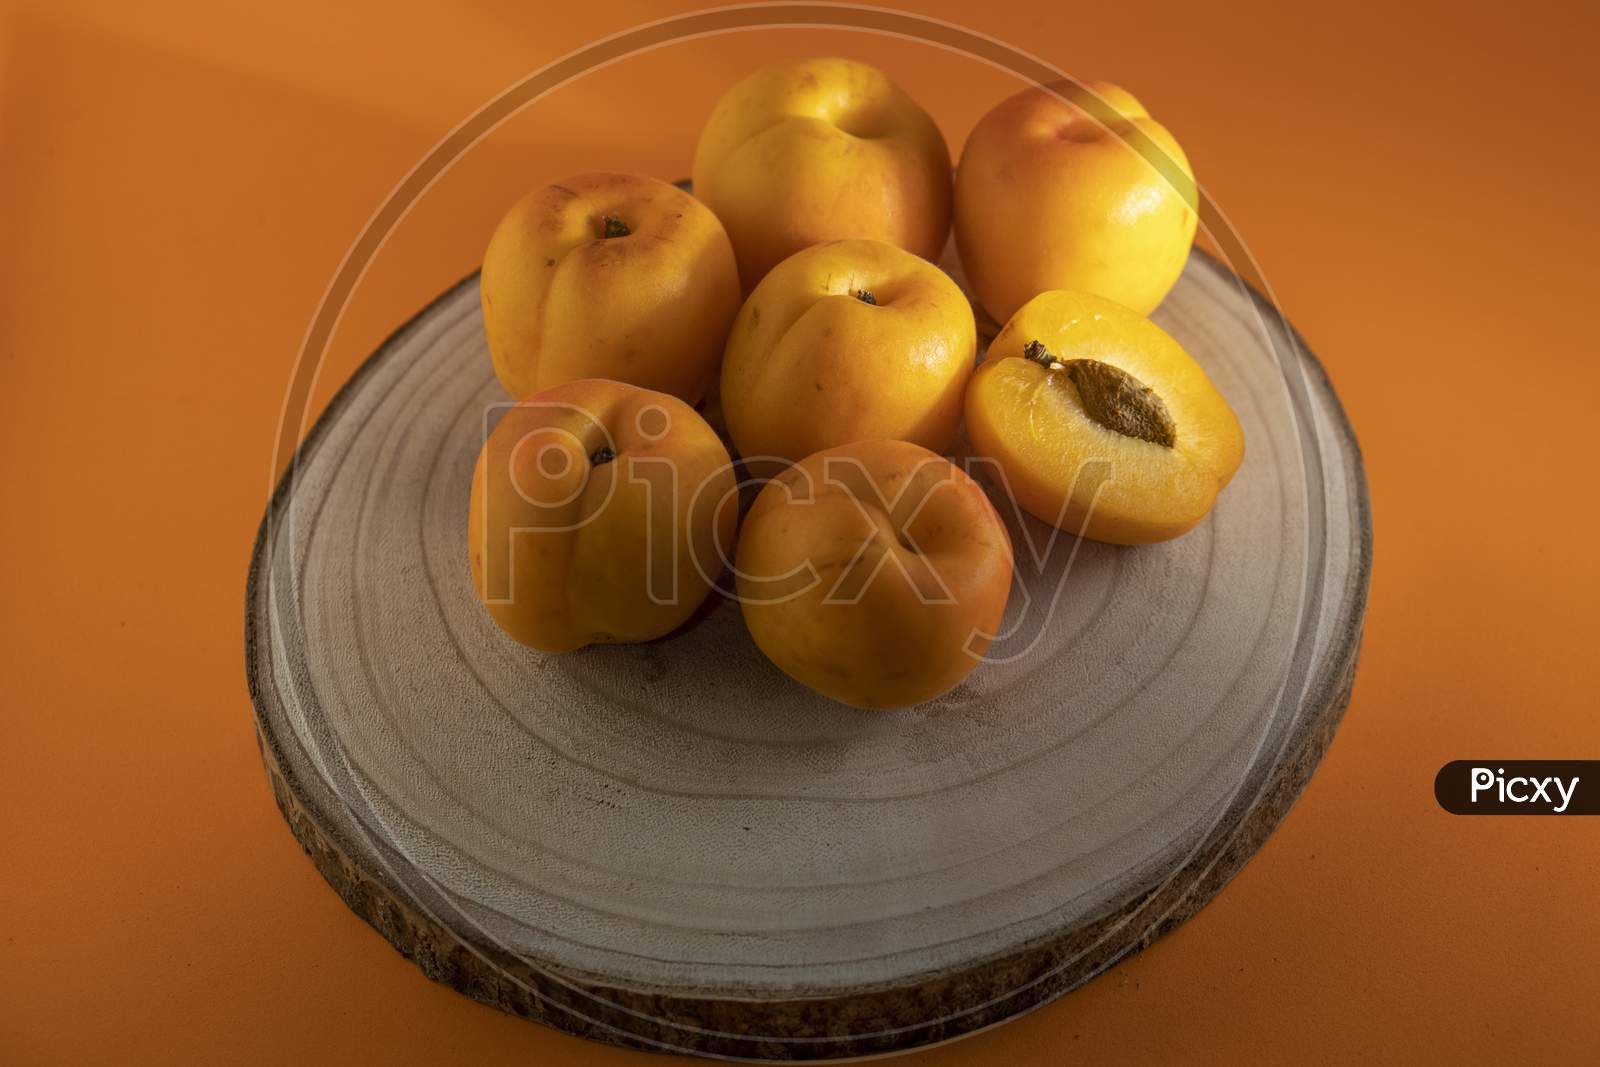 Peach on a wooden dish and an orange background.